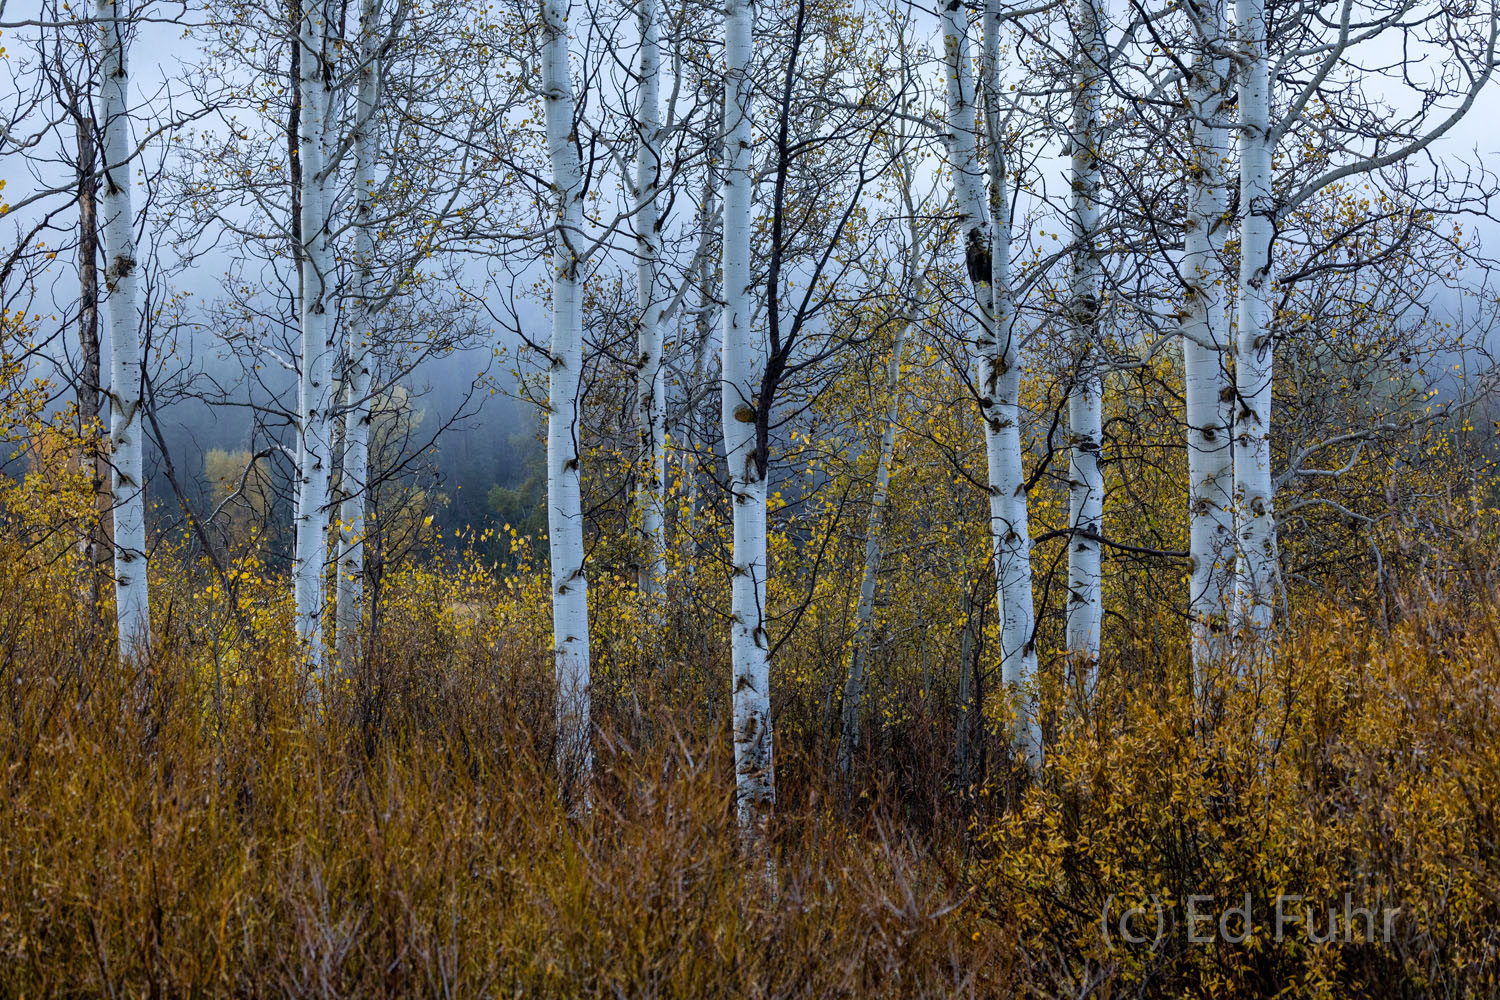 In summer some of the Park's largest predators often emerge with little warning through these small groves of aspen and nearby...